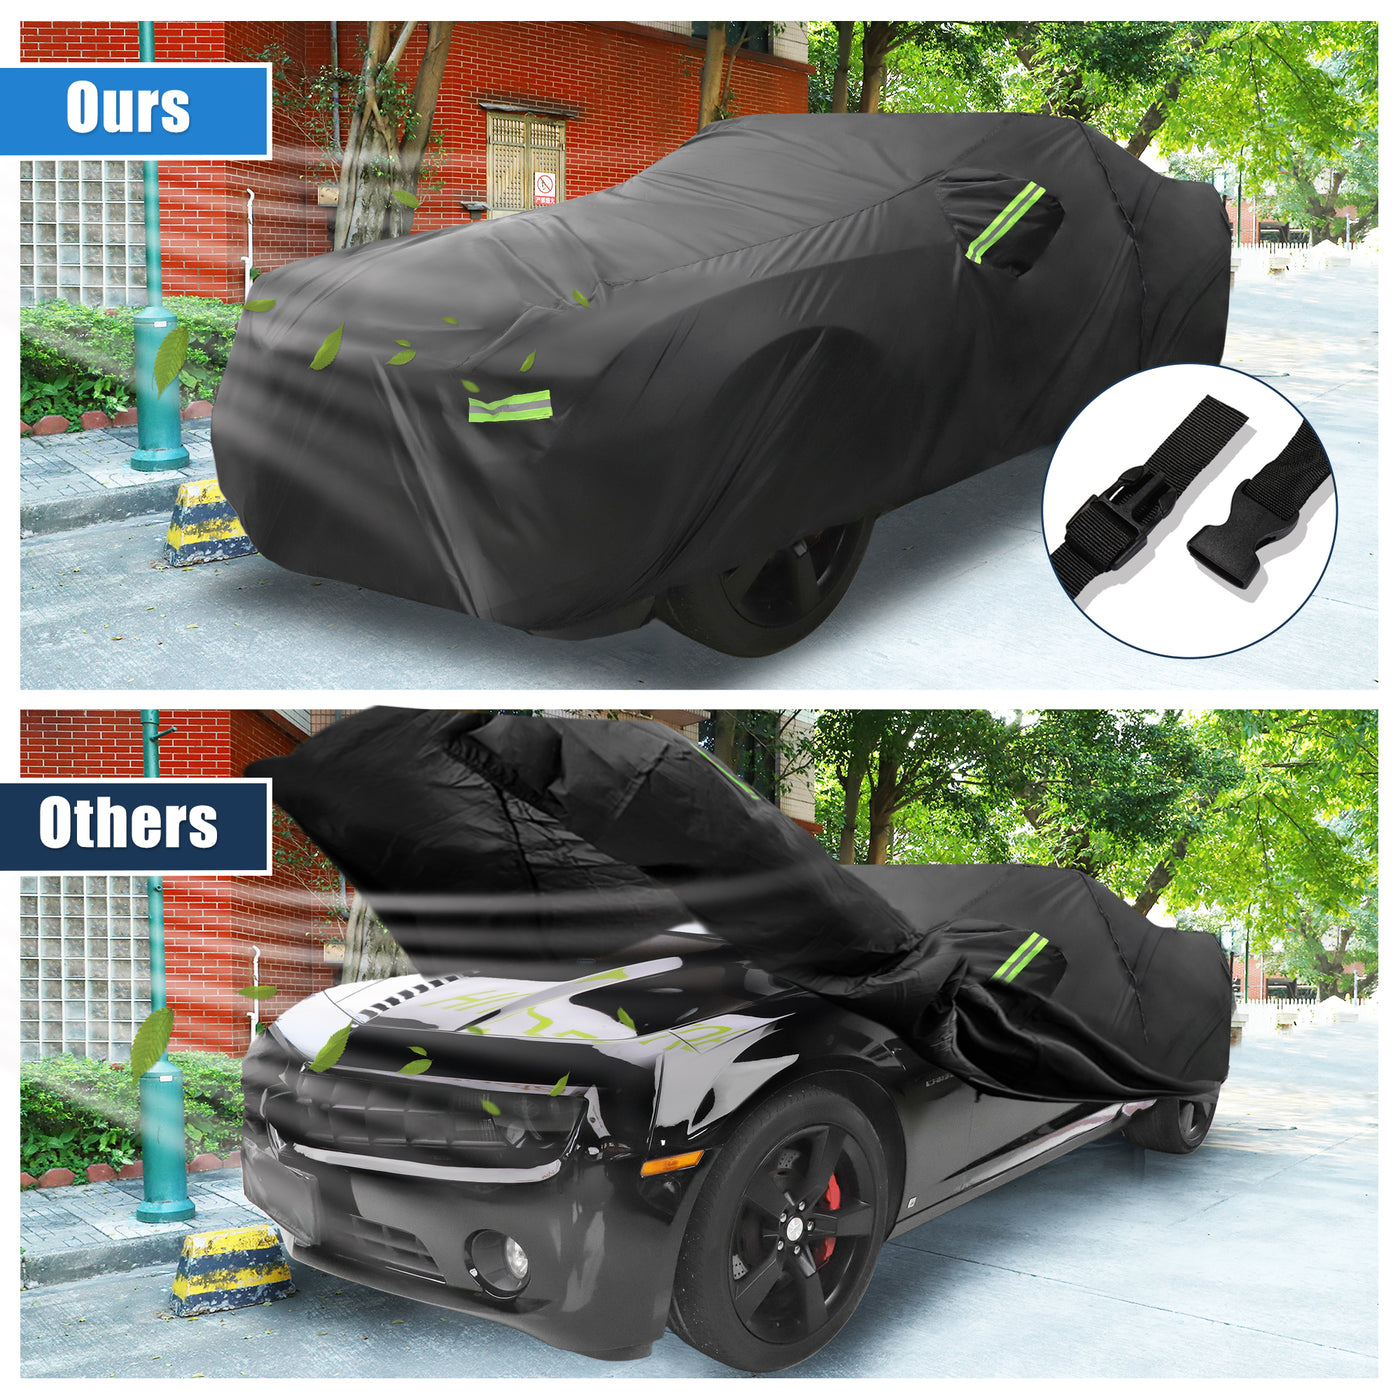 X AUTOHAUX Waterproof Car Cover for Chevrolet Camaro 2010-2022 210D Outdoor Full Car Cover All Weather Windproof Sun Rain Protection with Door Zipper